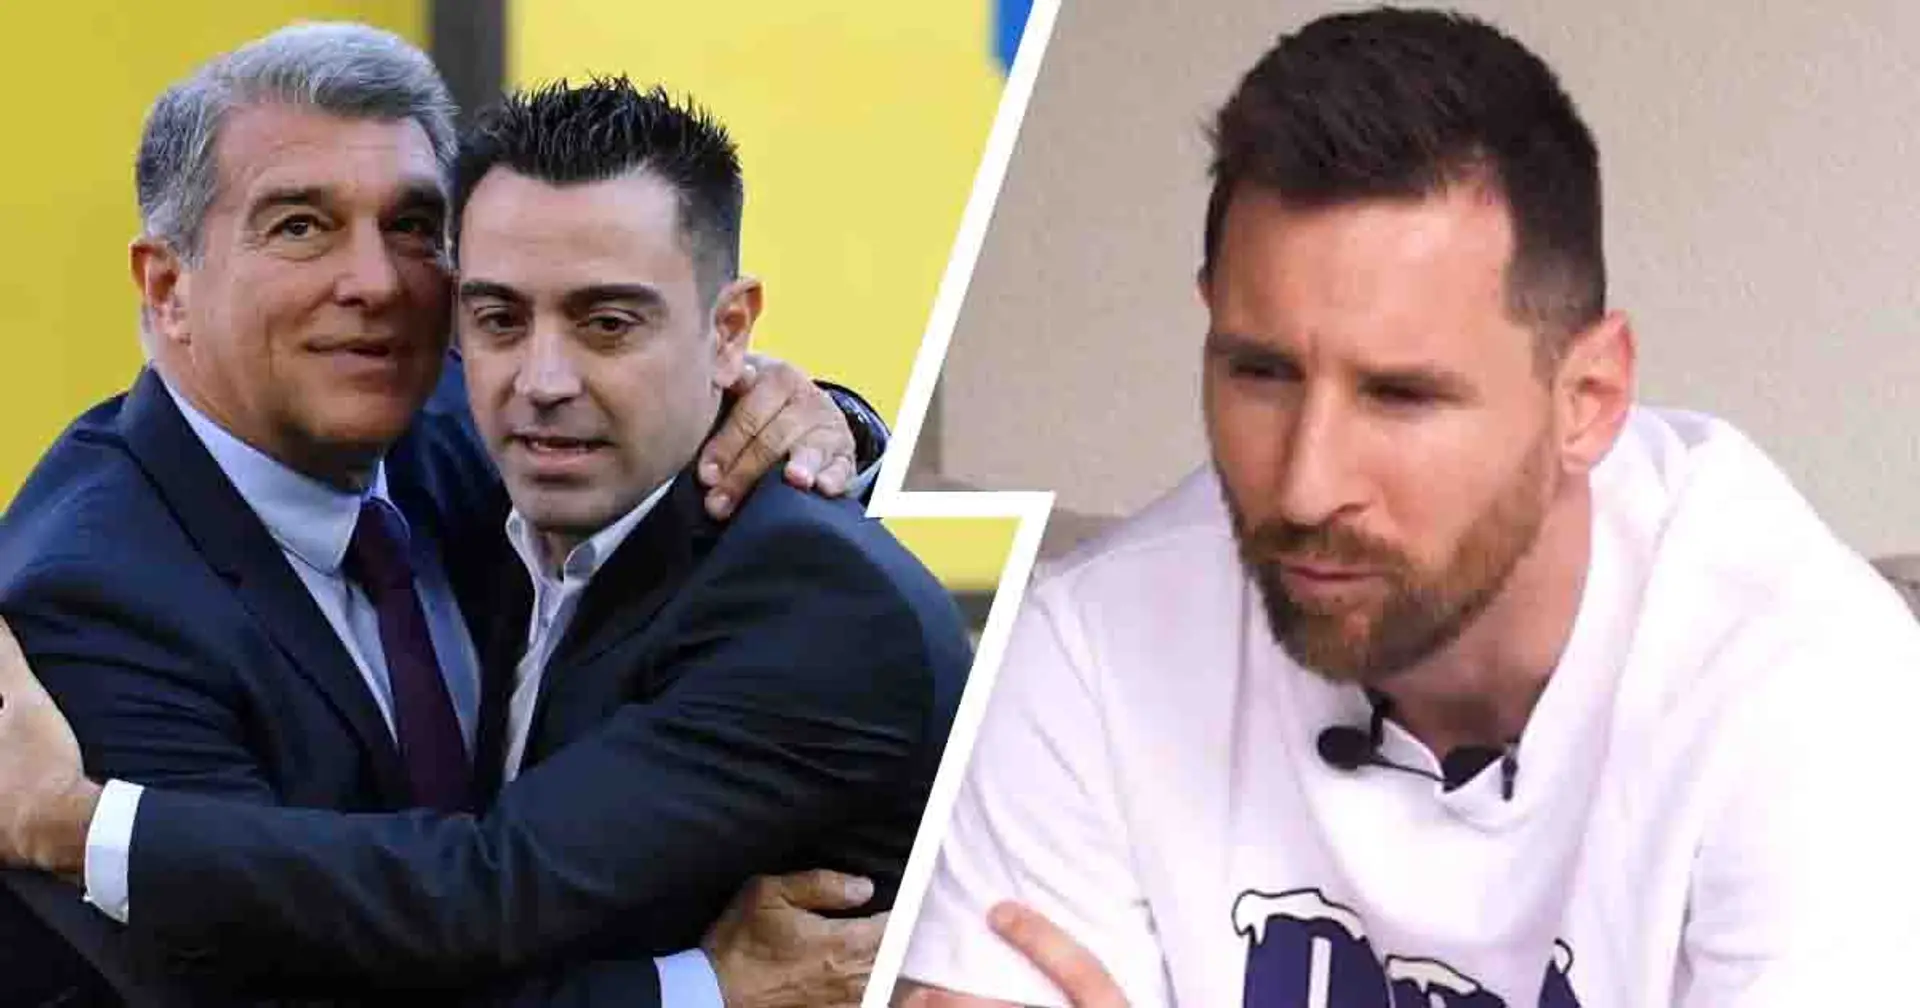 Did Messi have conversations with Xavi or Laporta before finalizing Inter Miami move? Answered